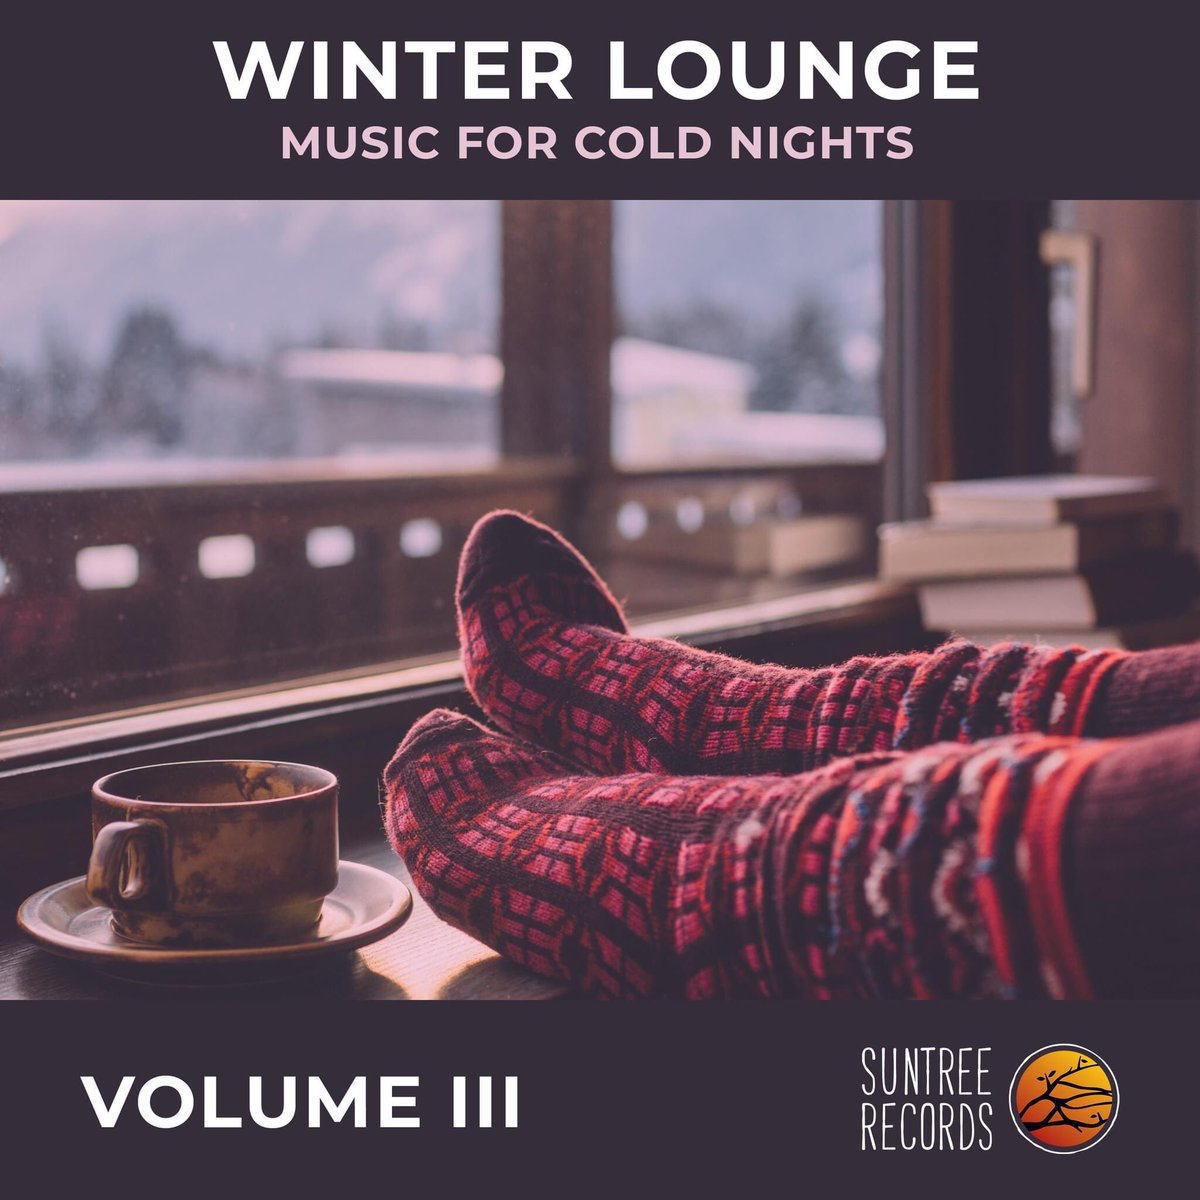 Out today! the new edition of Winter Lounge Vol. III
a collection of beautiful winter tracks ! incl. tracks from @richardearnshaw, @AdaniWolf, @odednir, @degzy99, and many great names 
Traxsource
traxsource.com/title/1934790/…
Beatport
beatport.com/release/winter…
#music #dj
#musicproducer